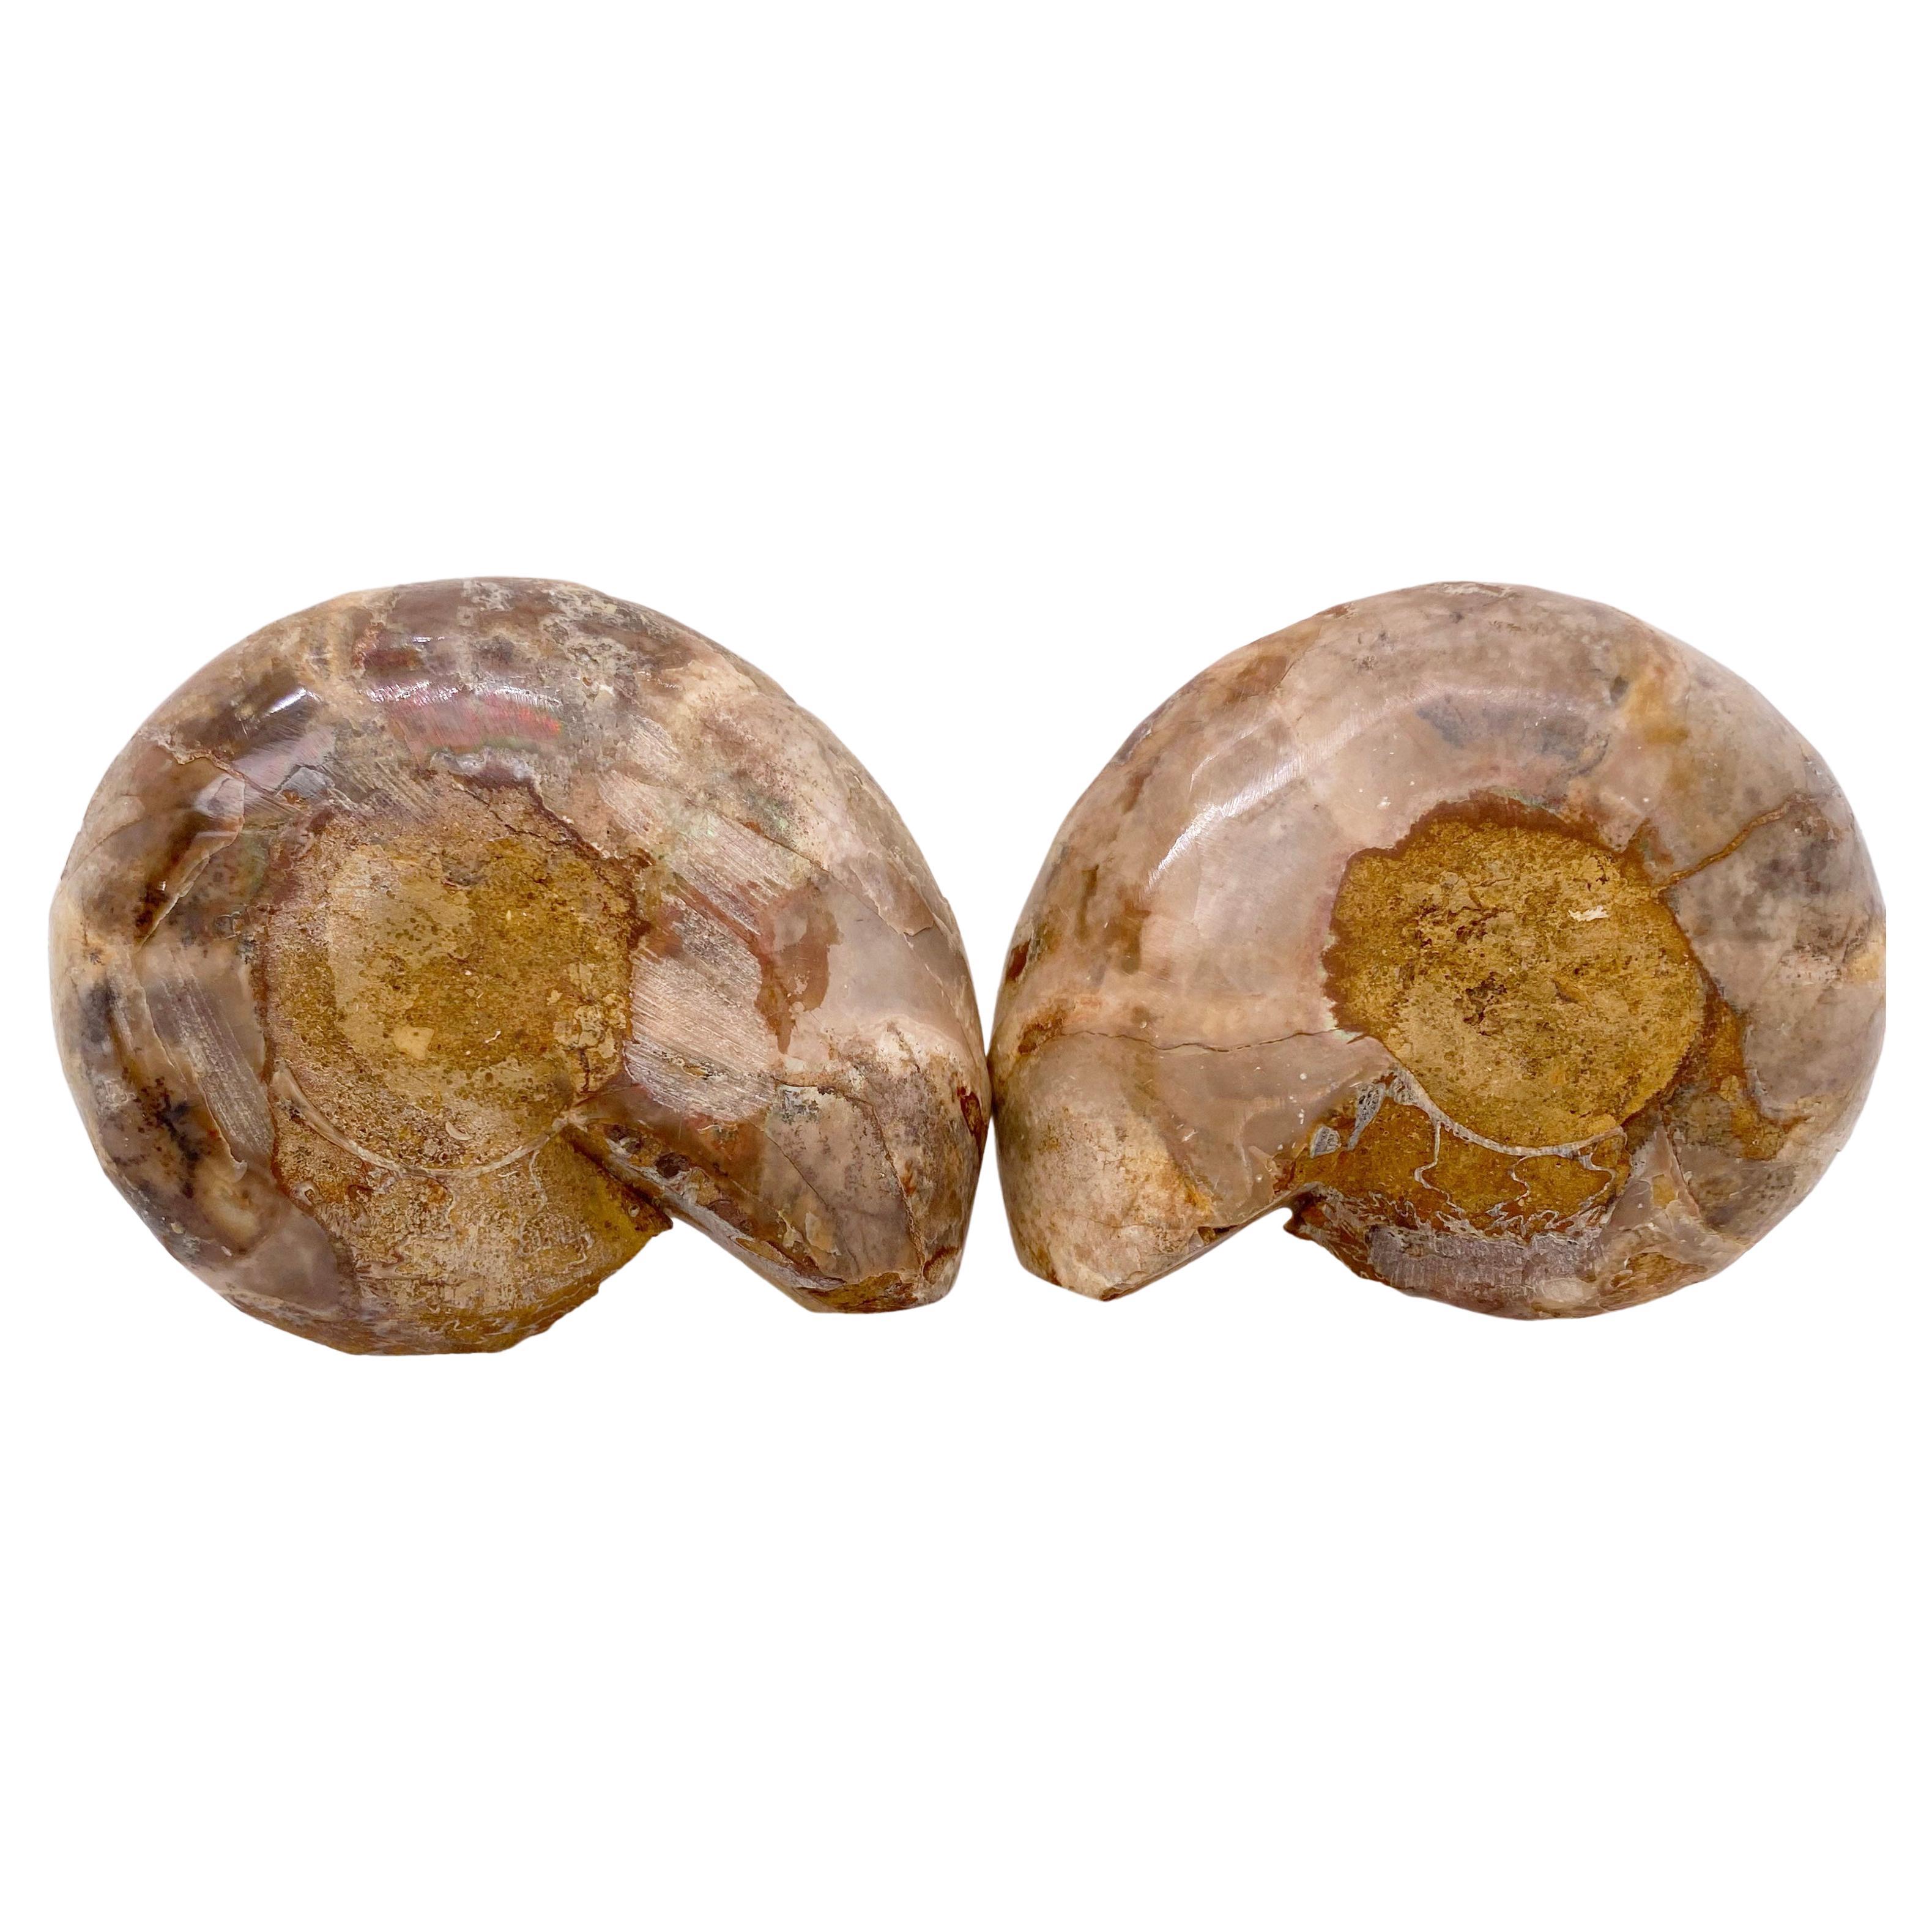 The history of an Ammonite dates back almost 400 million years ago during the Jurassic period when this marine animal once roamed the oceans. Since their extinction, Ammonite has been searched for as buyers are fond of their natural beauty and